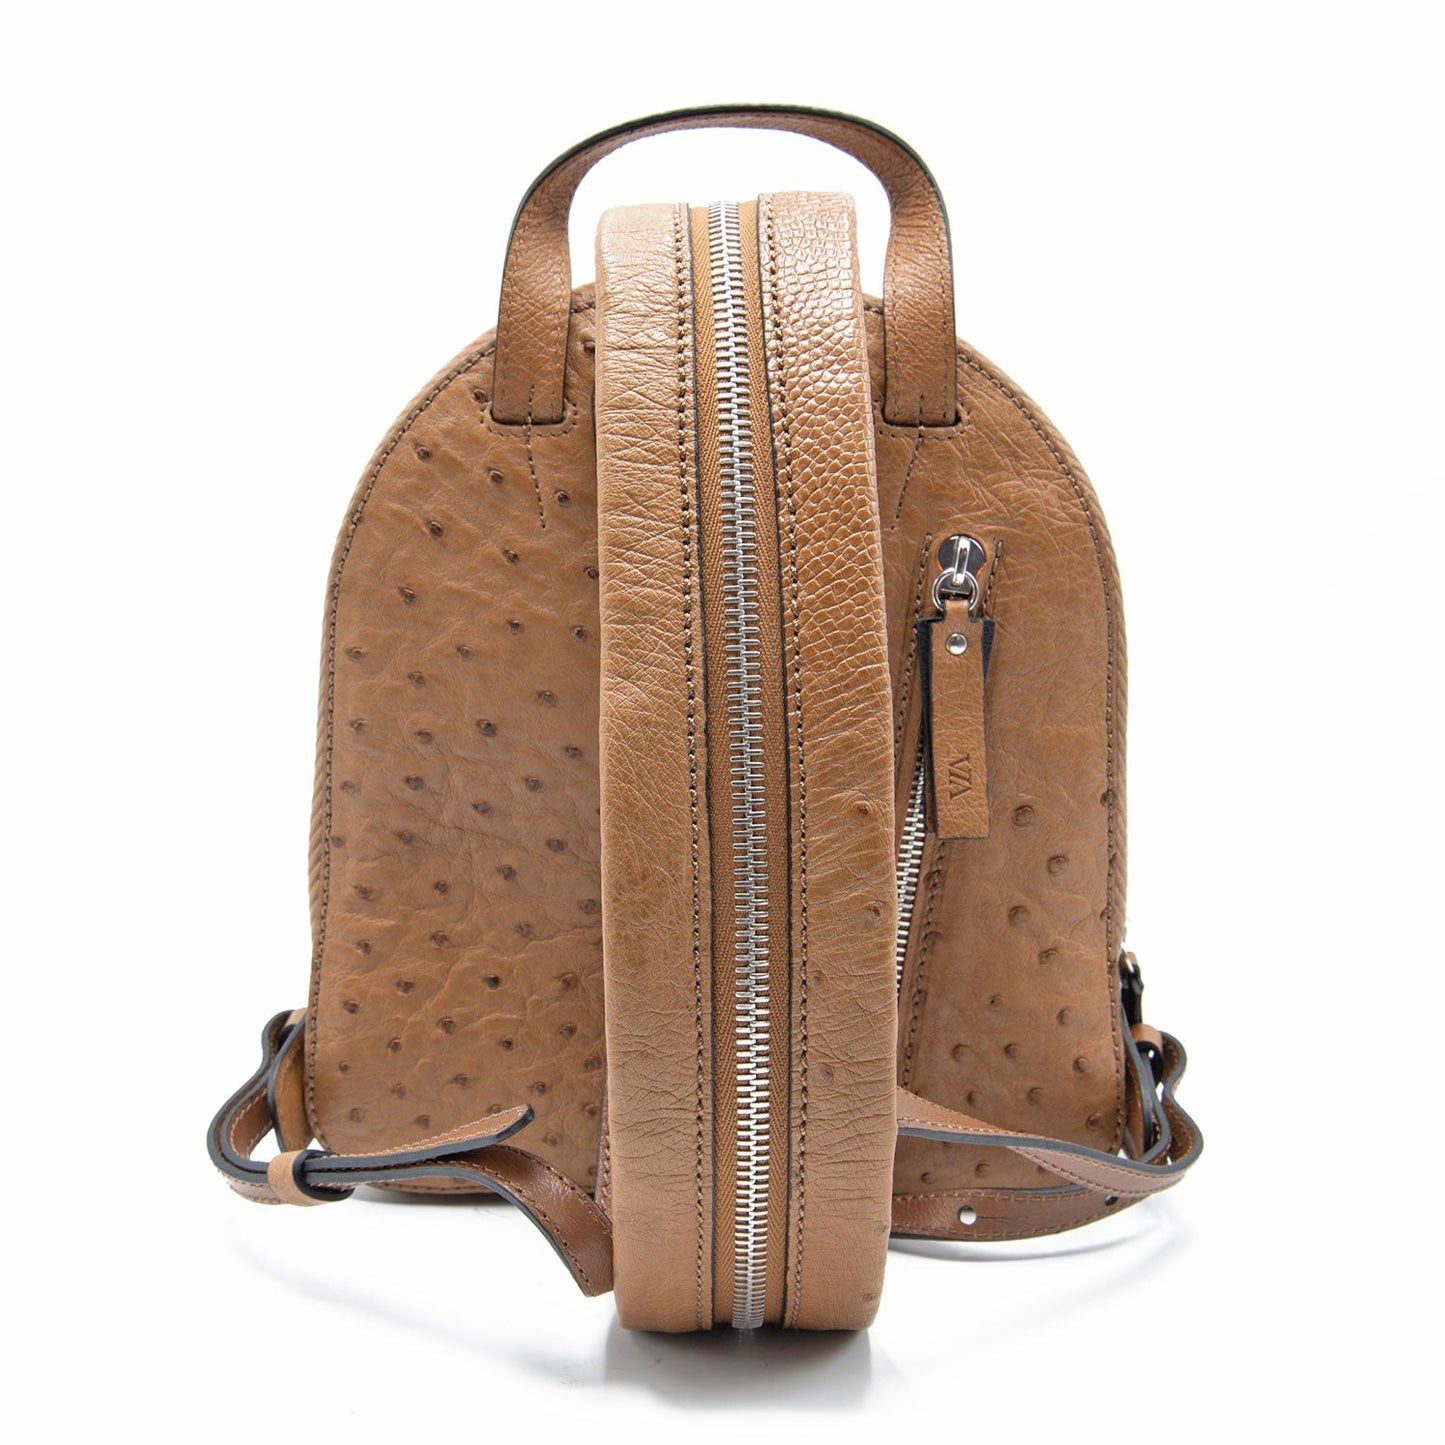 Ostrich Leather Desert Backpack - Ostrich Leather Bag